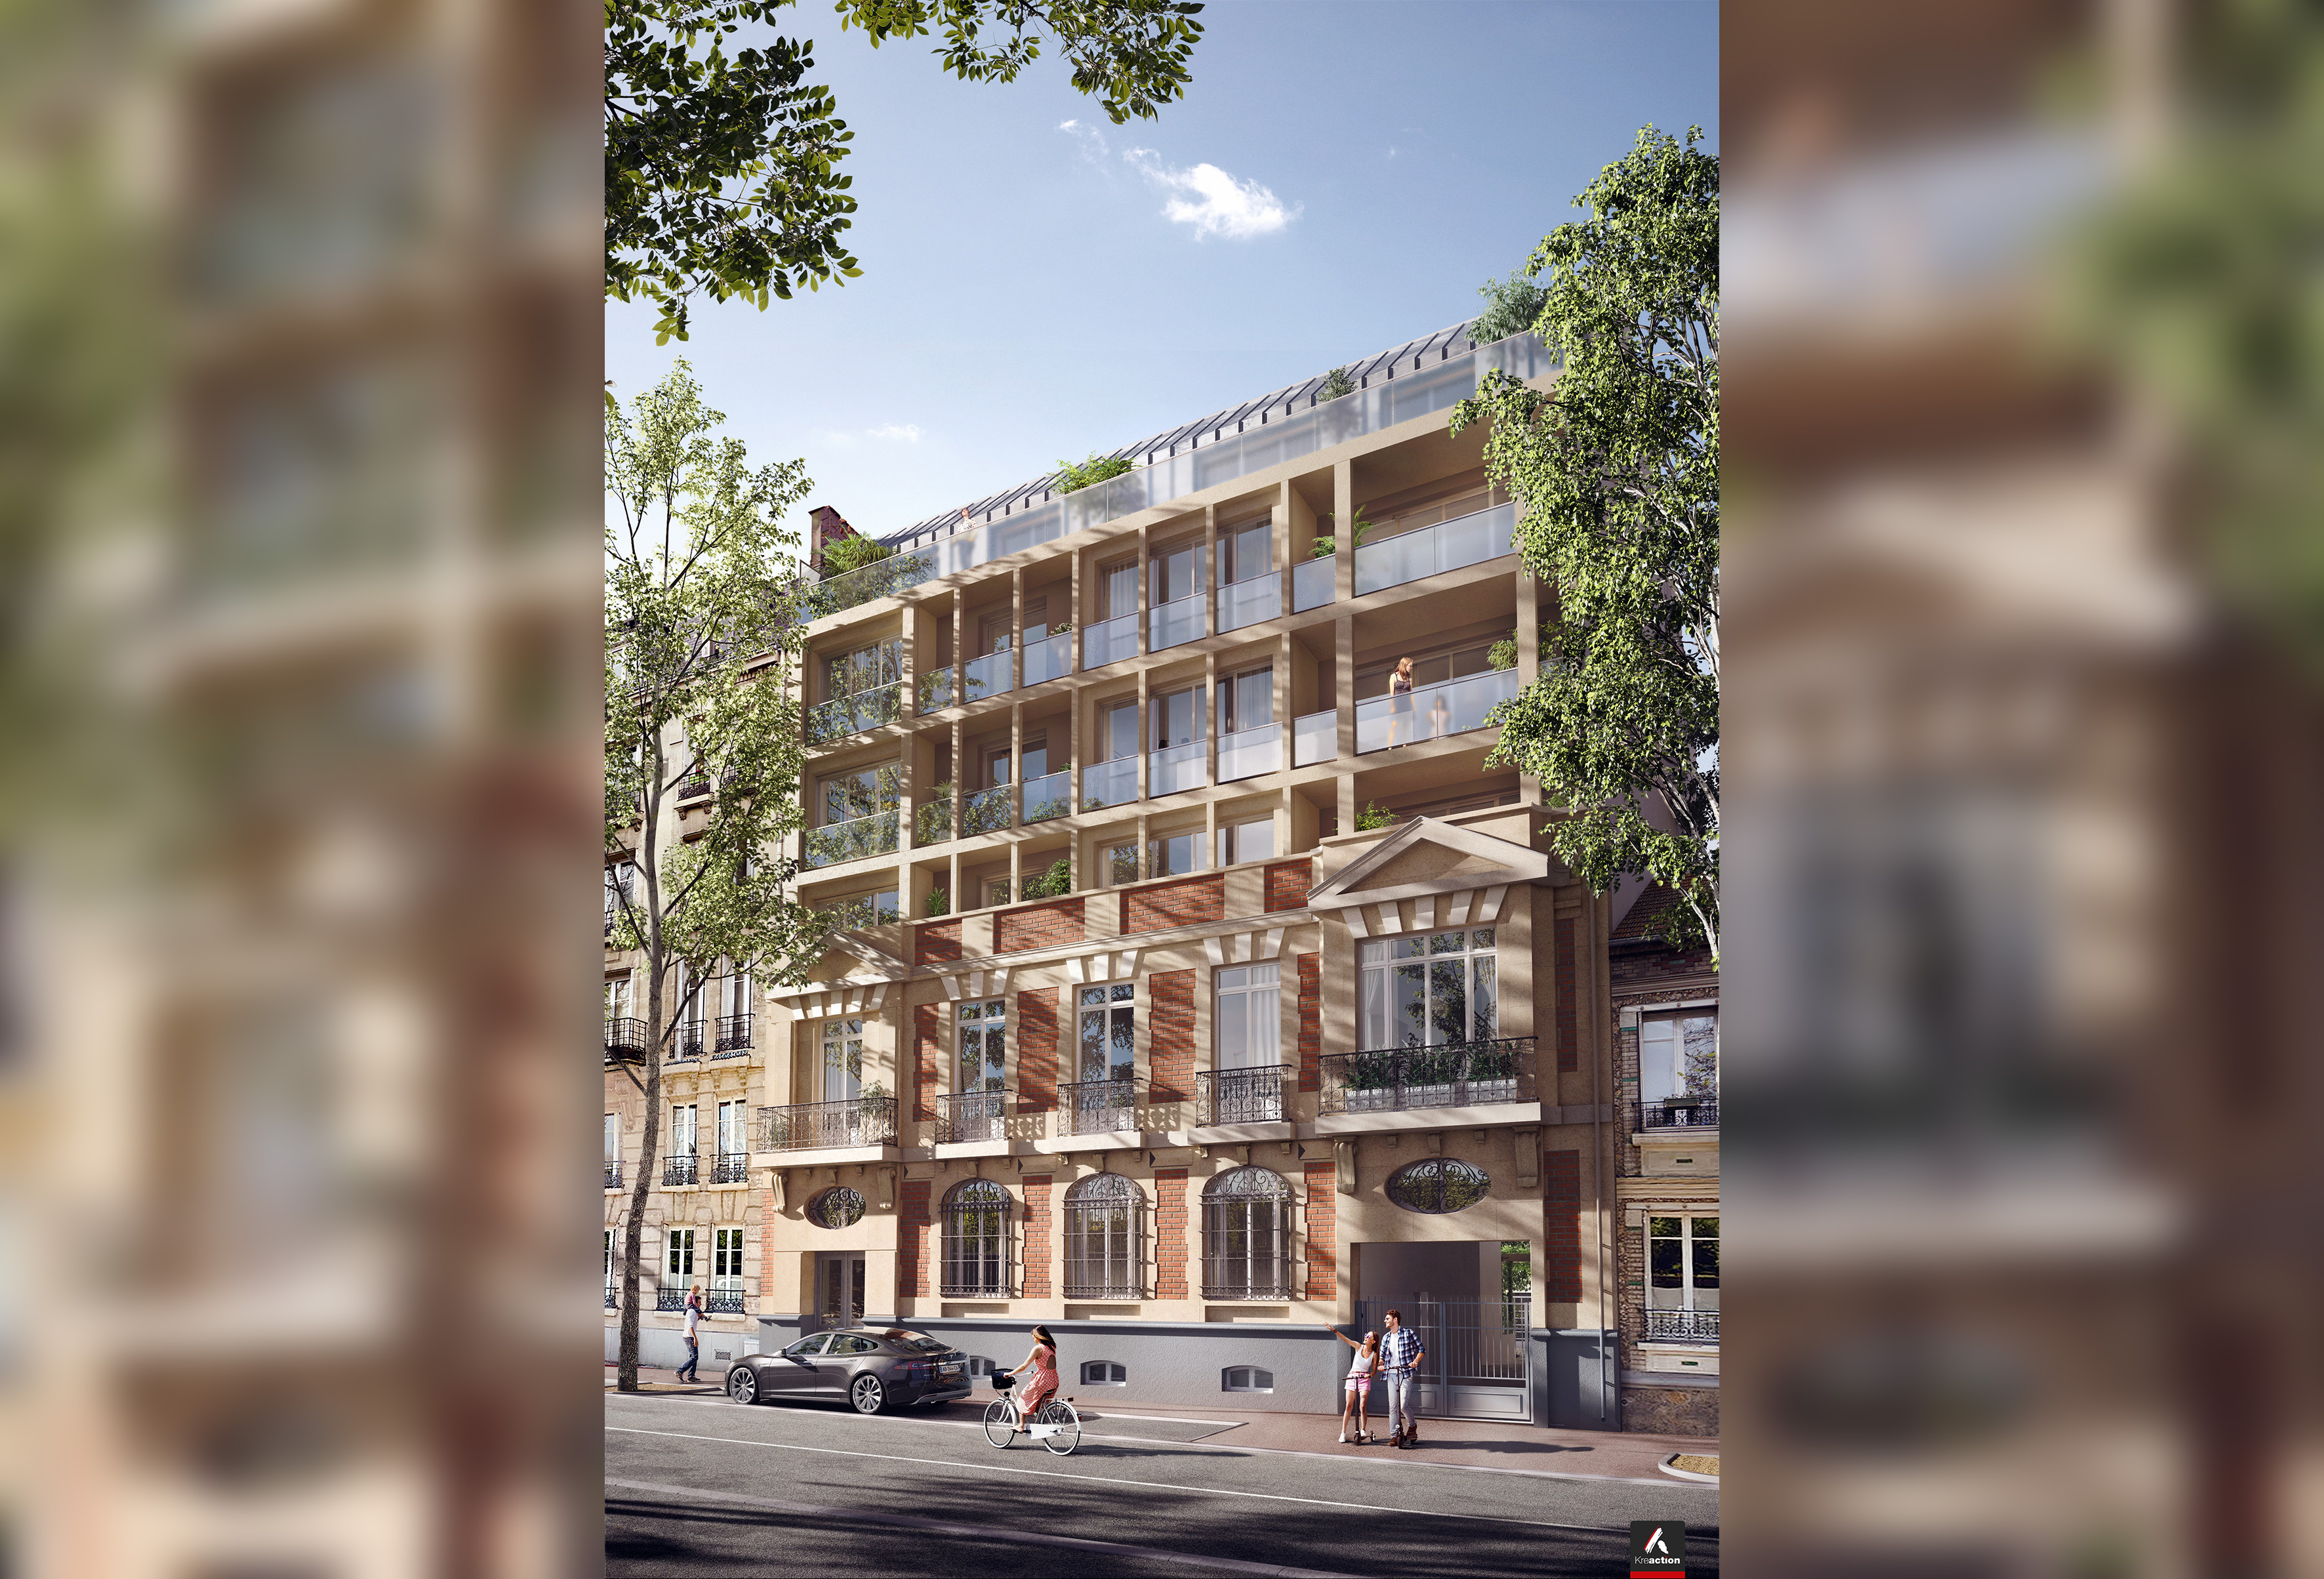 Programme immobilier neuf 30 RUE D'ISSY